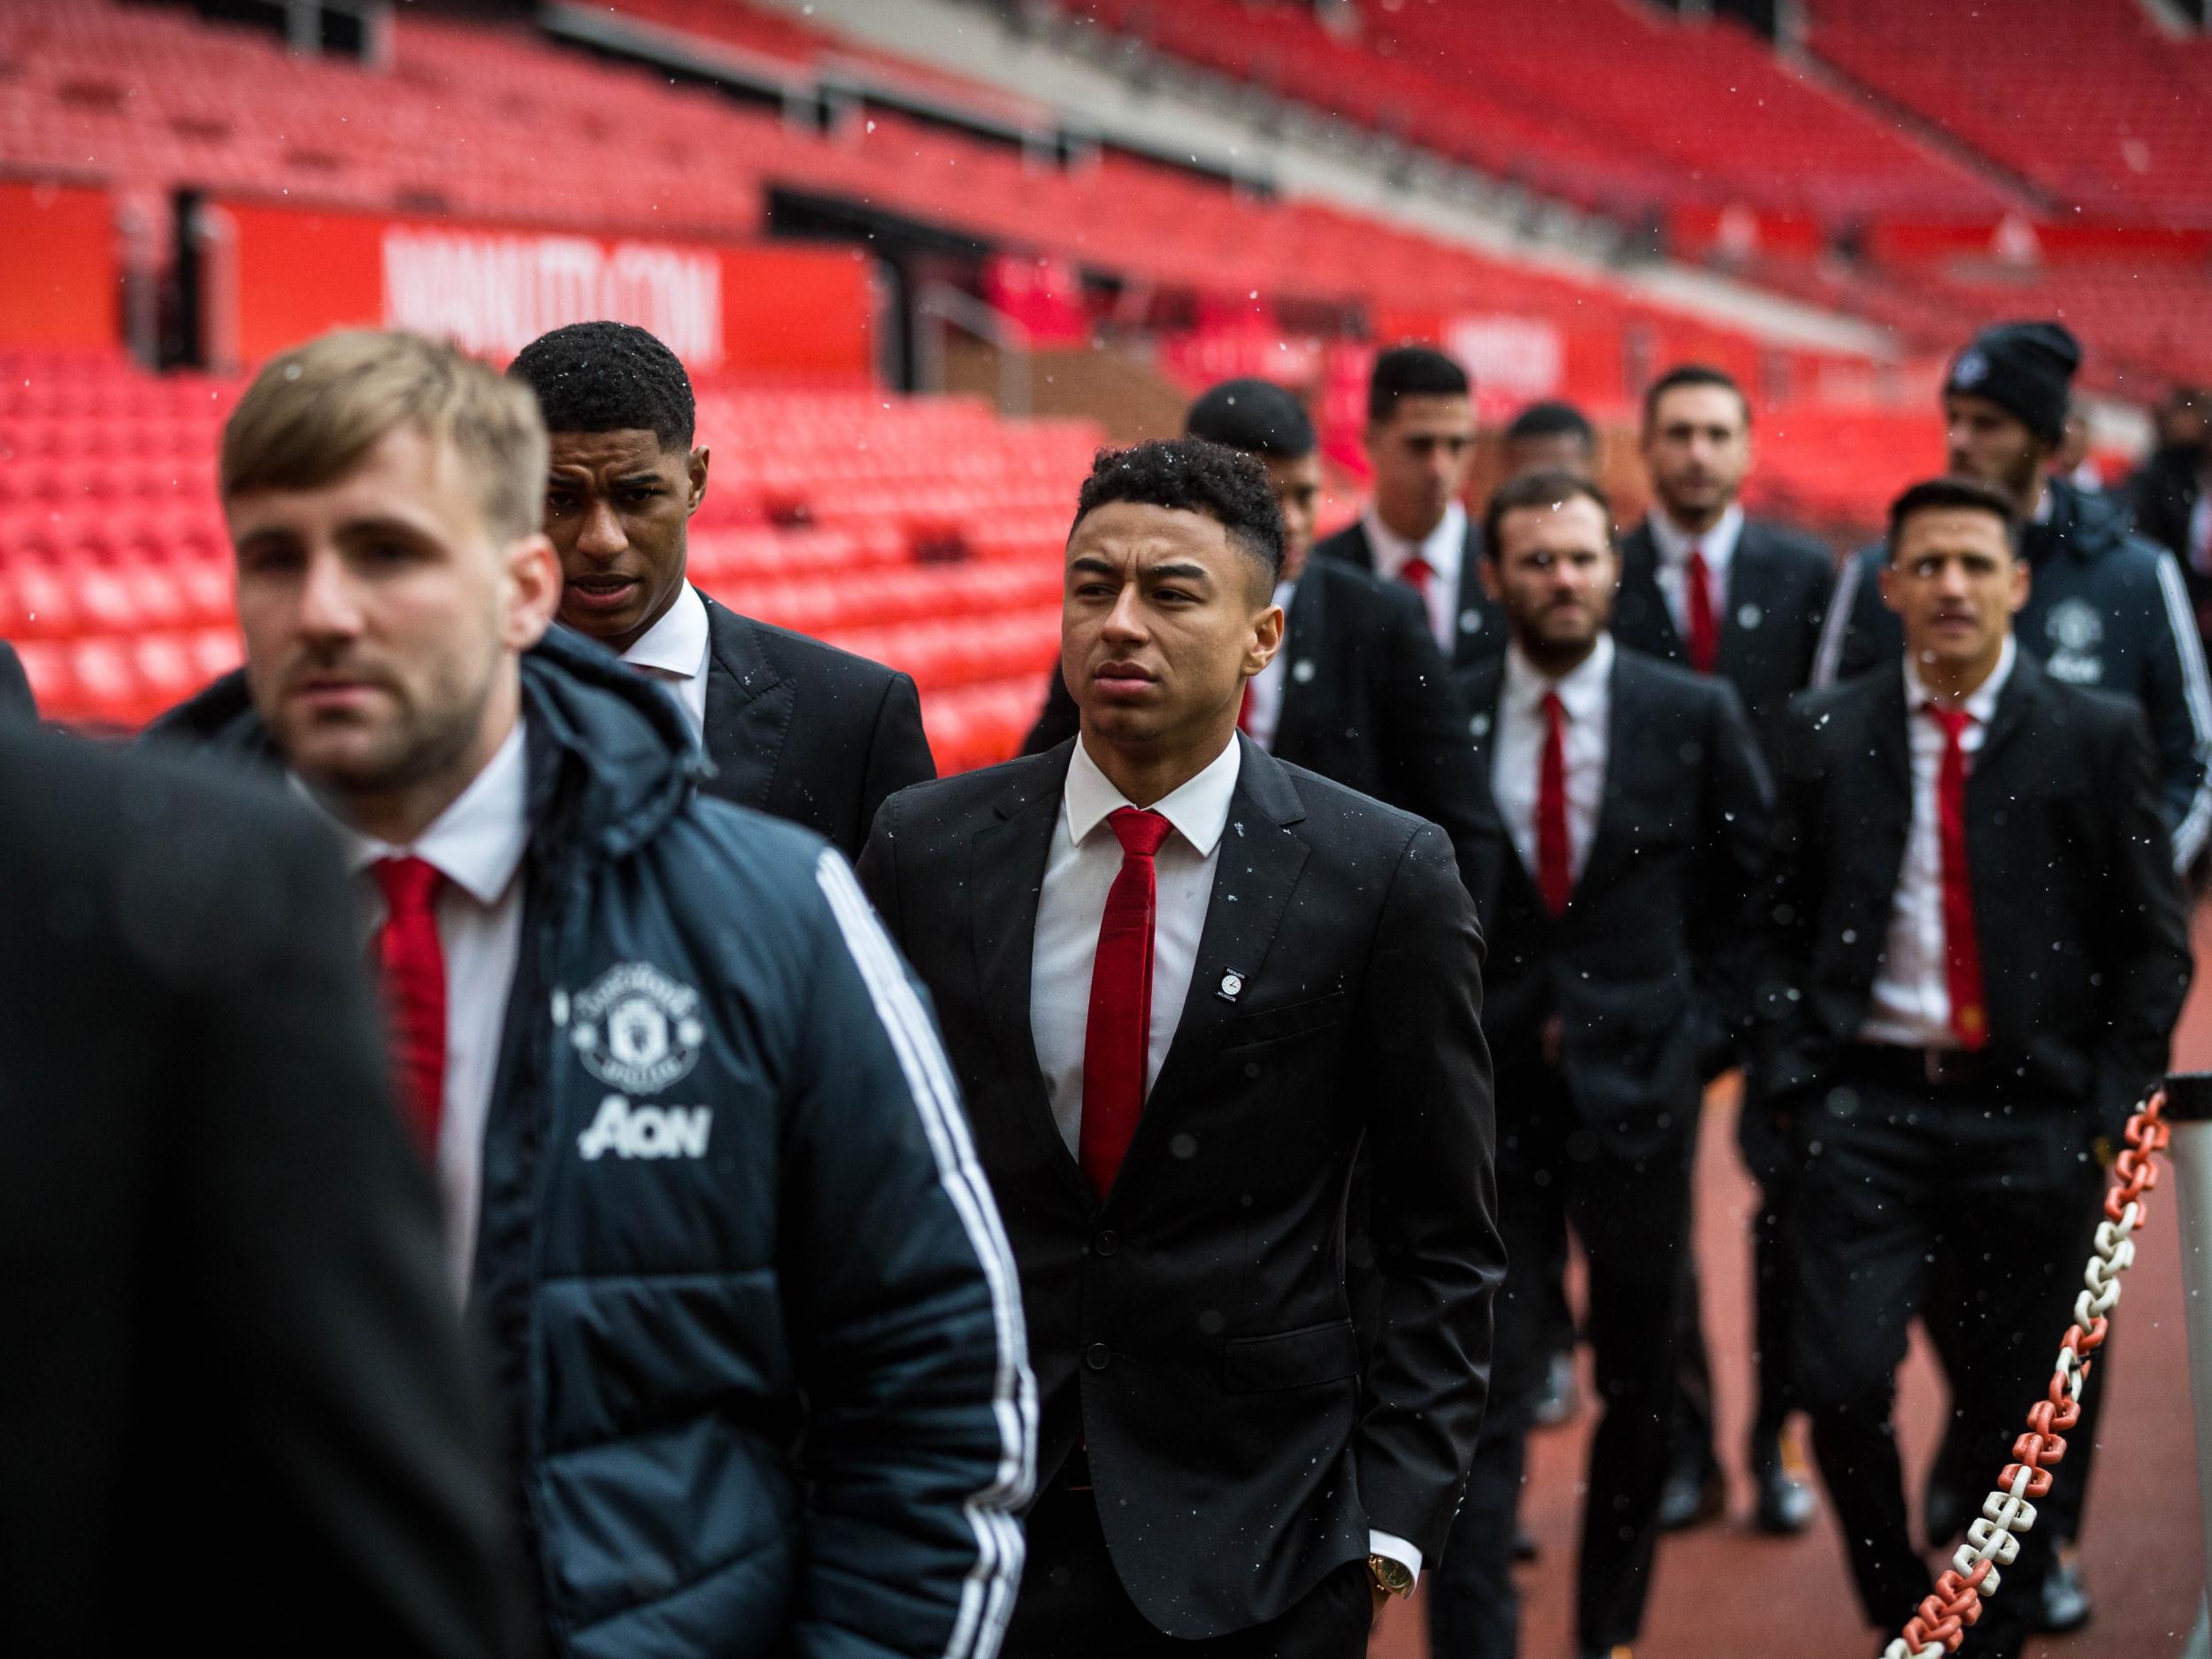 Lingard attended the service with his Manchester United teammates